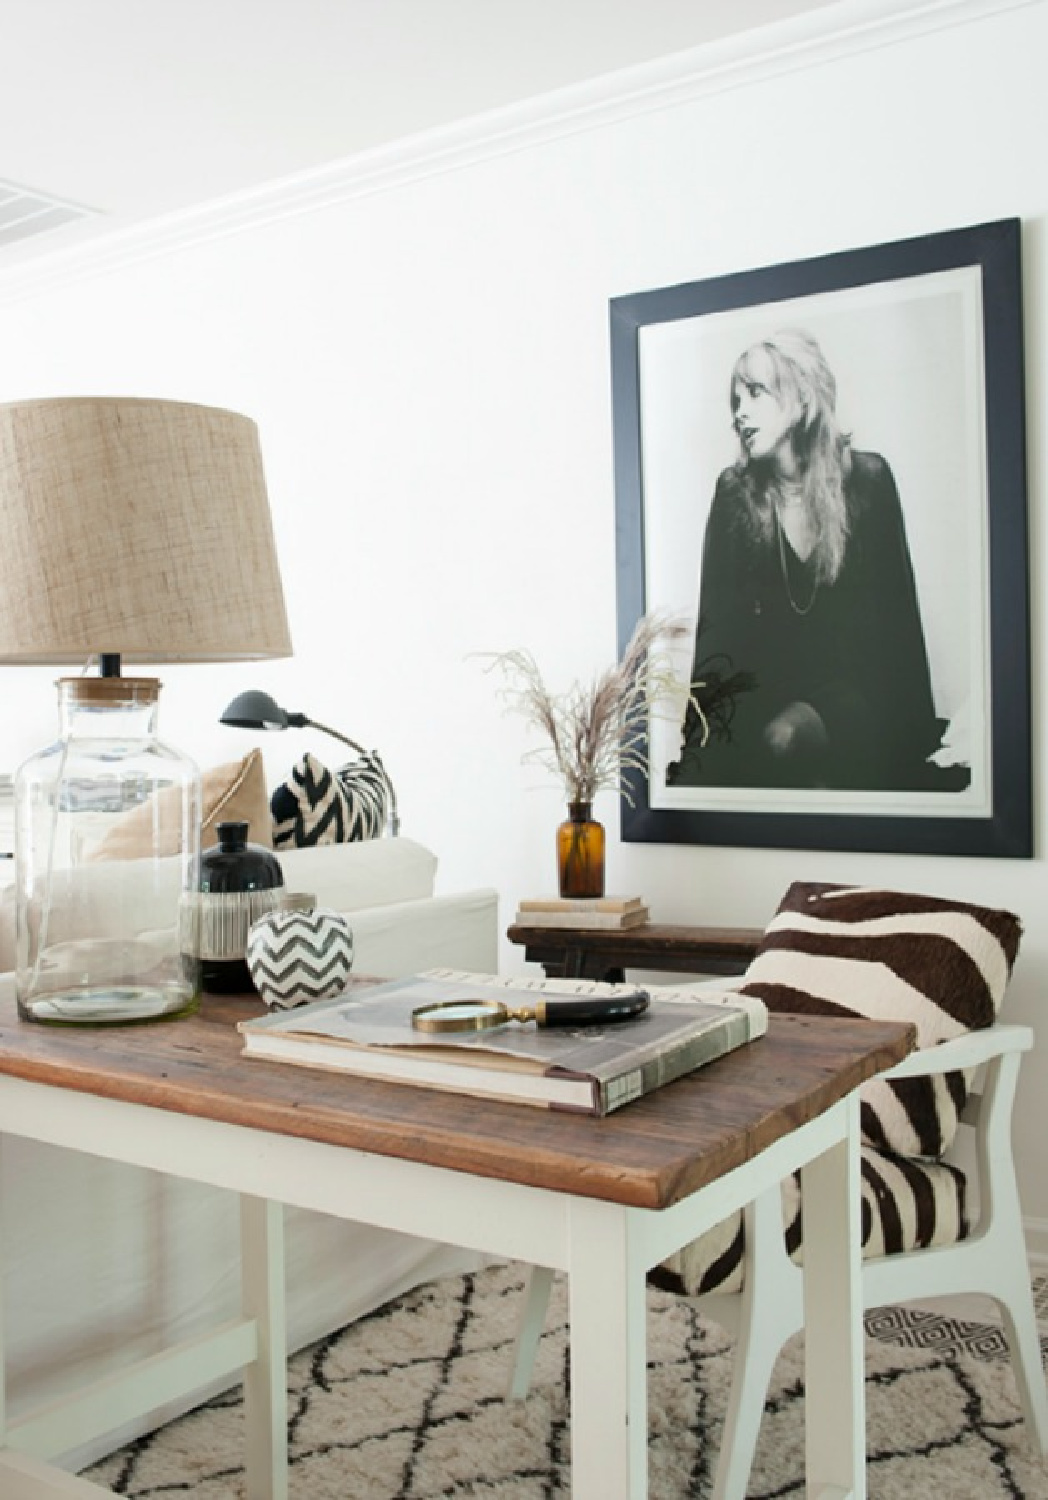 Modern rustic home office of Sherry Hart with Stevie Nicks framed print and zebra cushion. #homeoffices #neutralinteriors